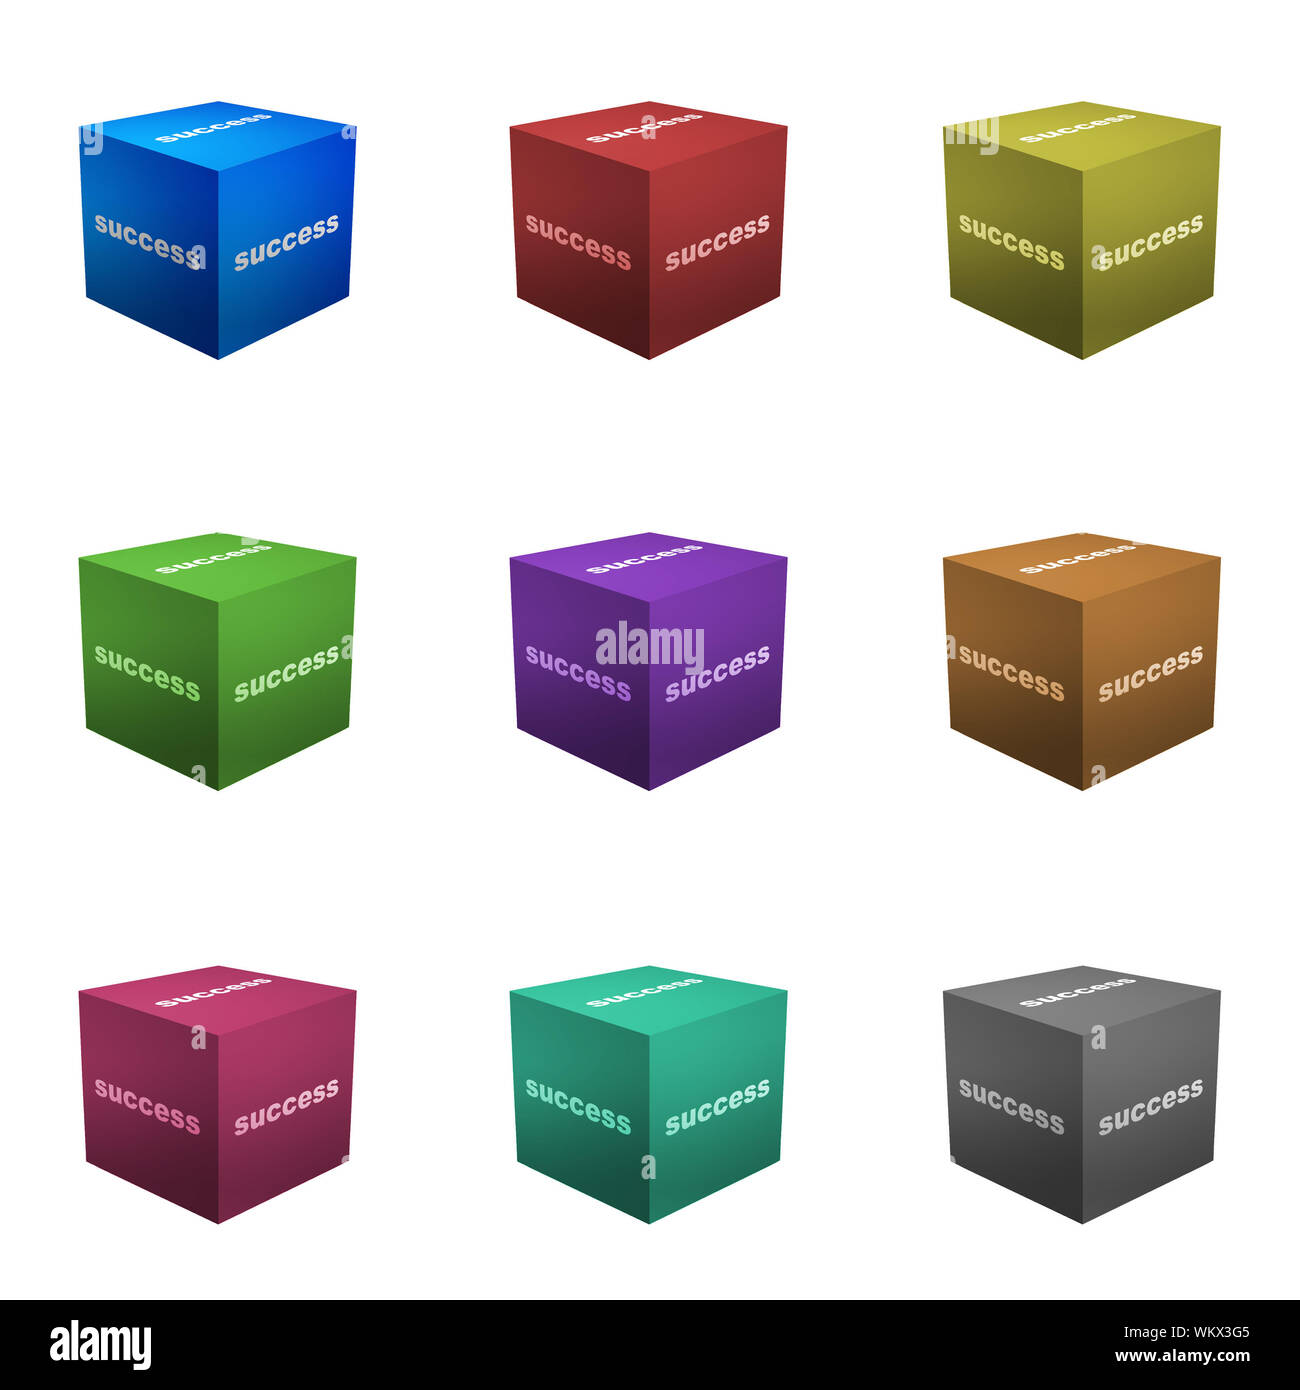 Success Boxes in 3d Cube Format Isolated on White Stock Photo